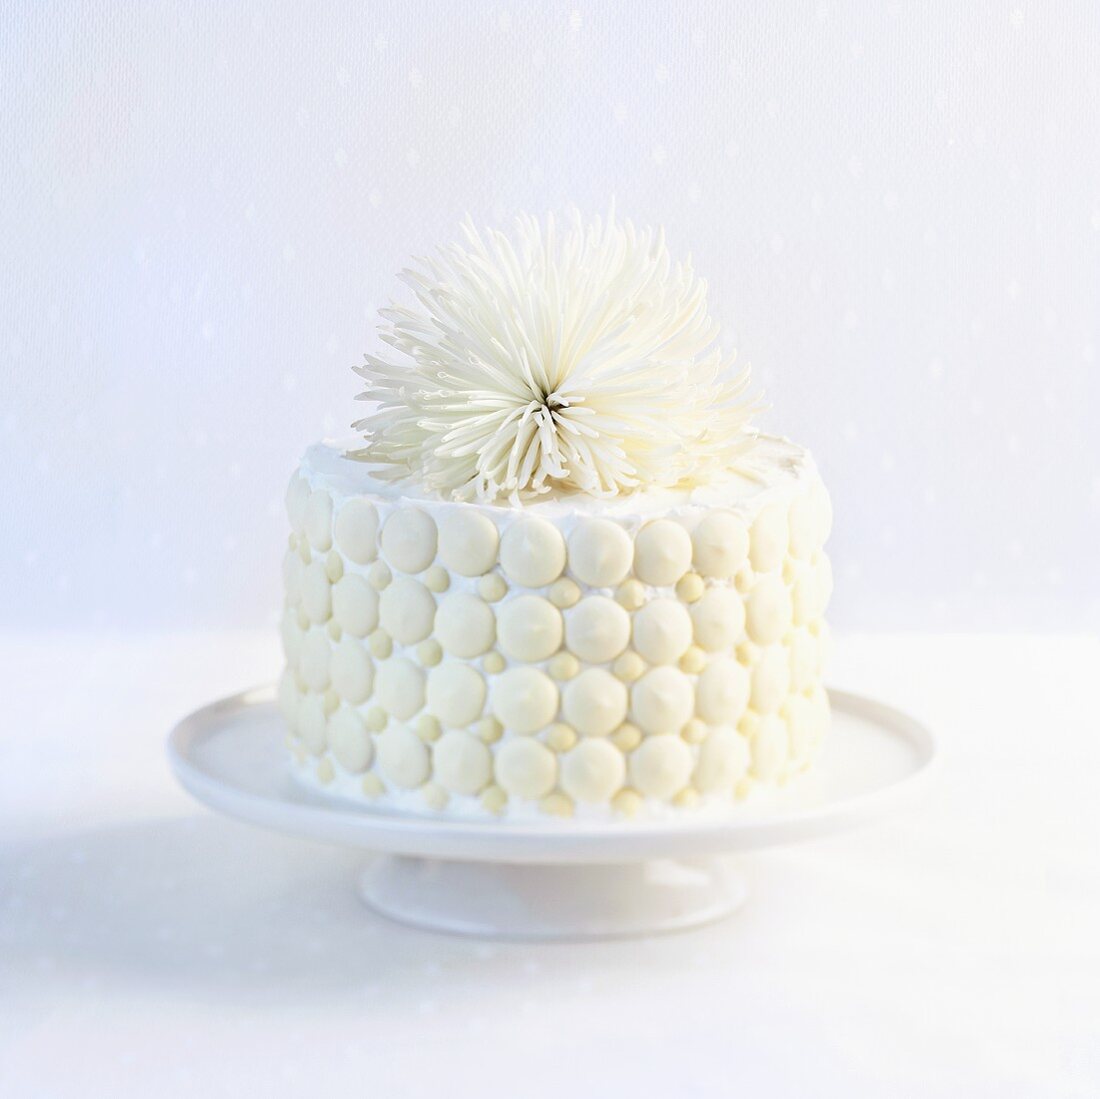 White Chocolate Cake with White Chocolate Buttons and White Flower on Top